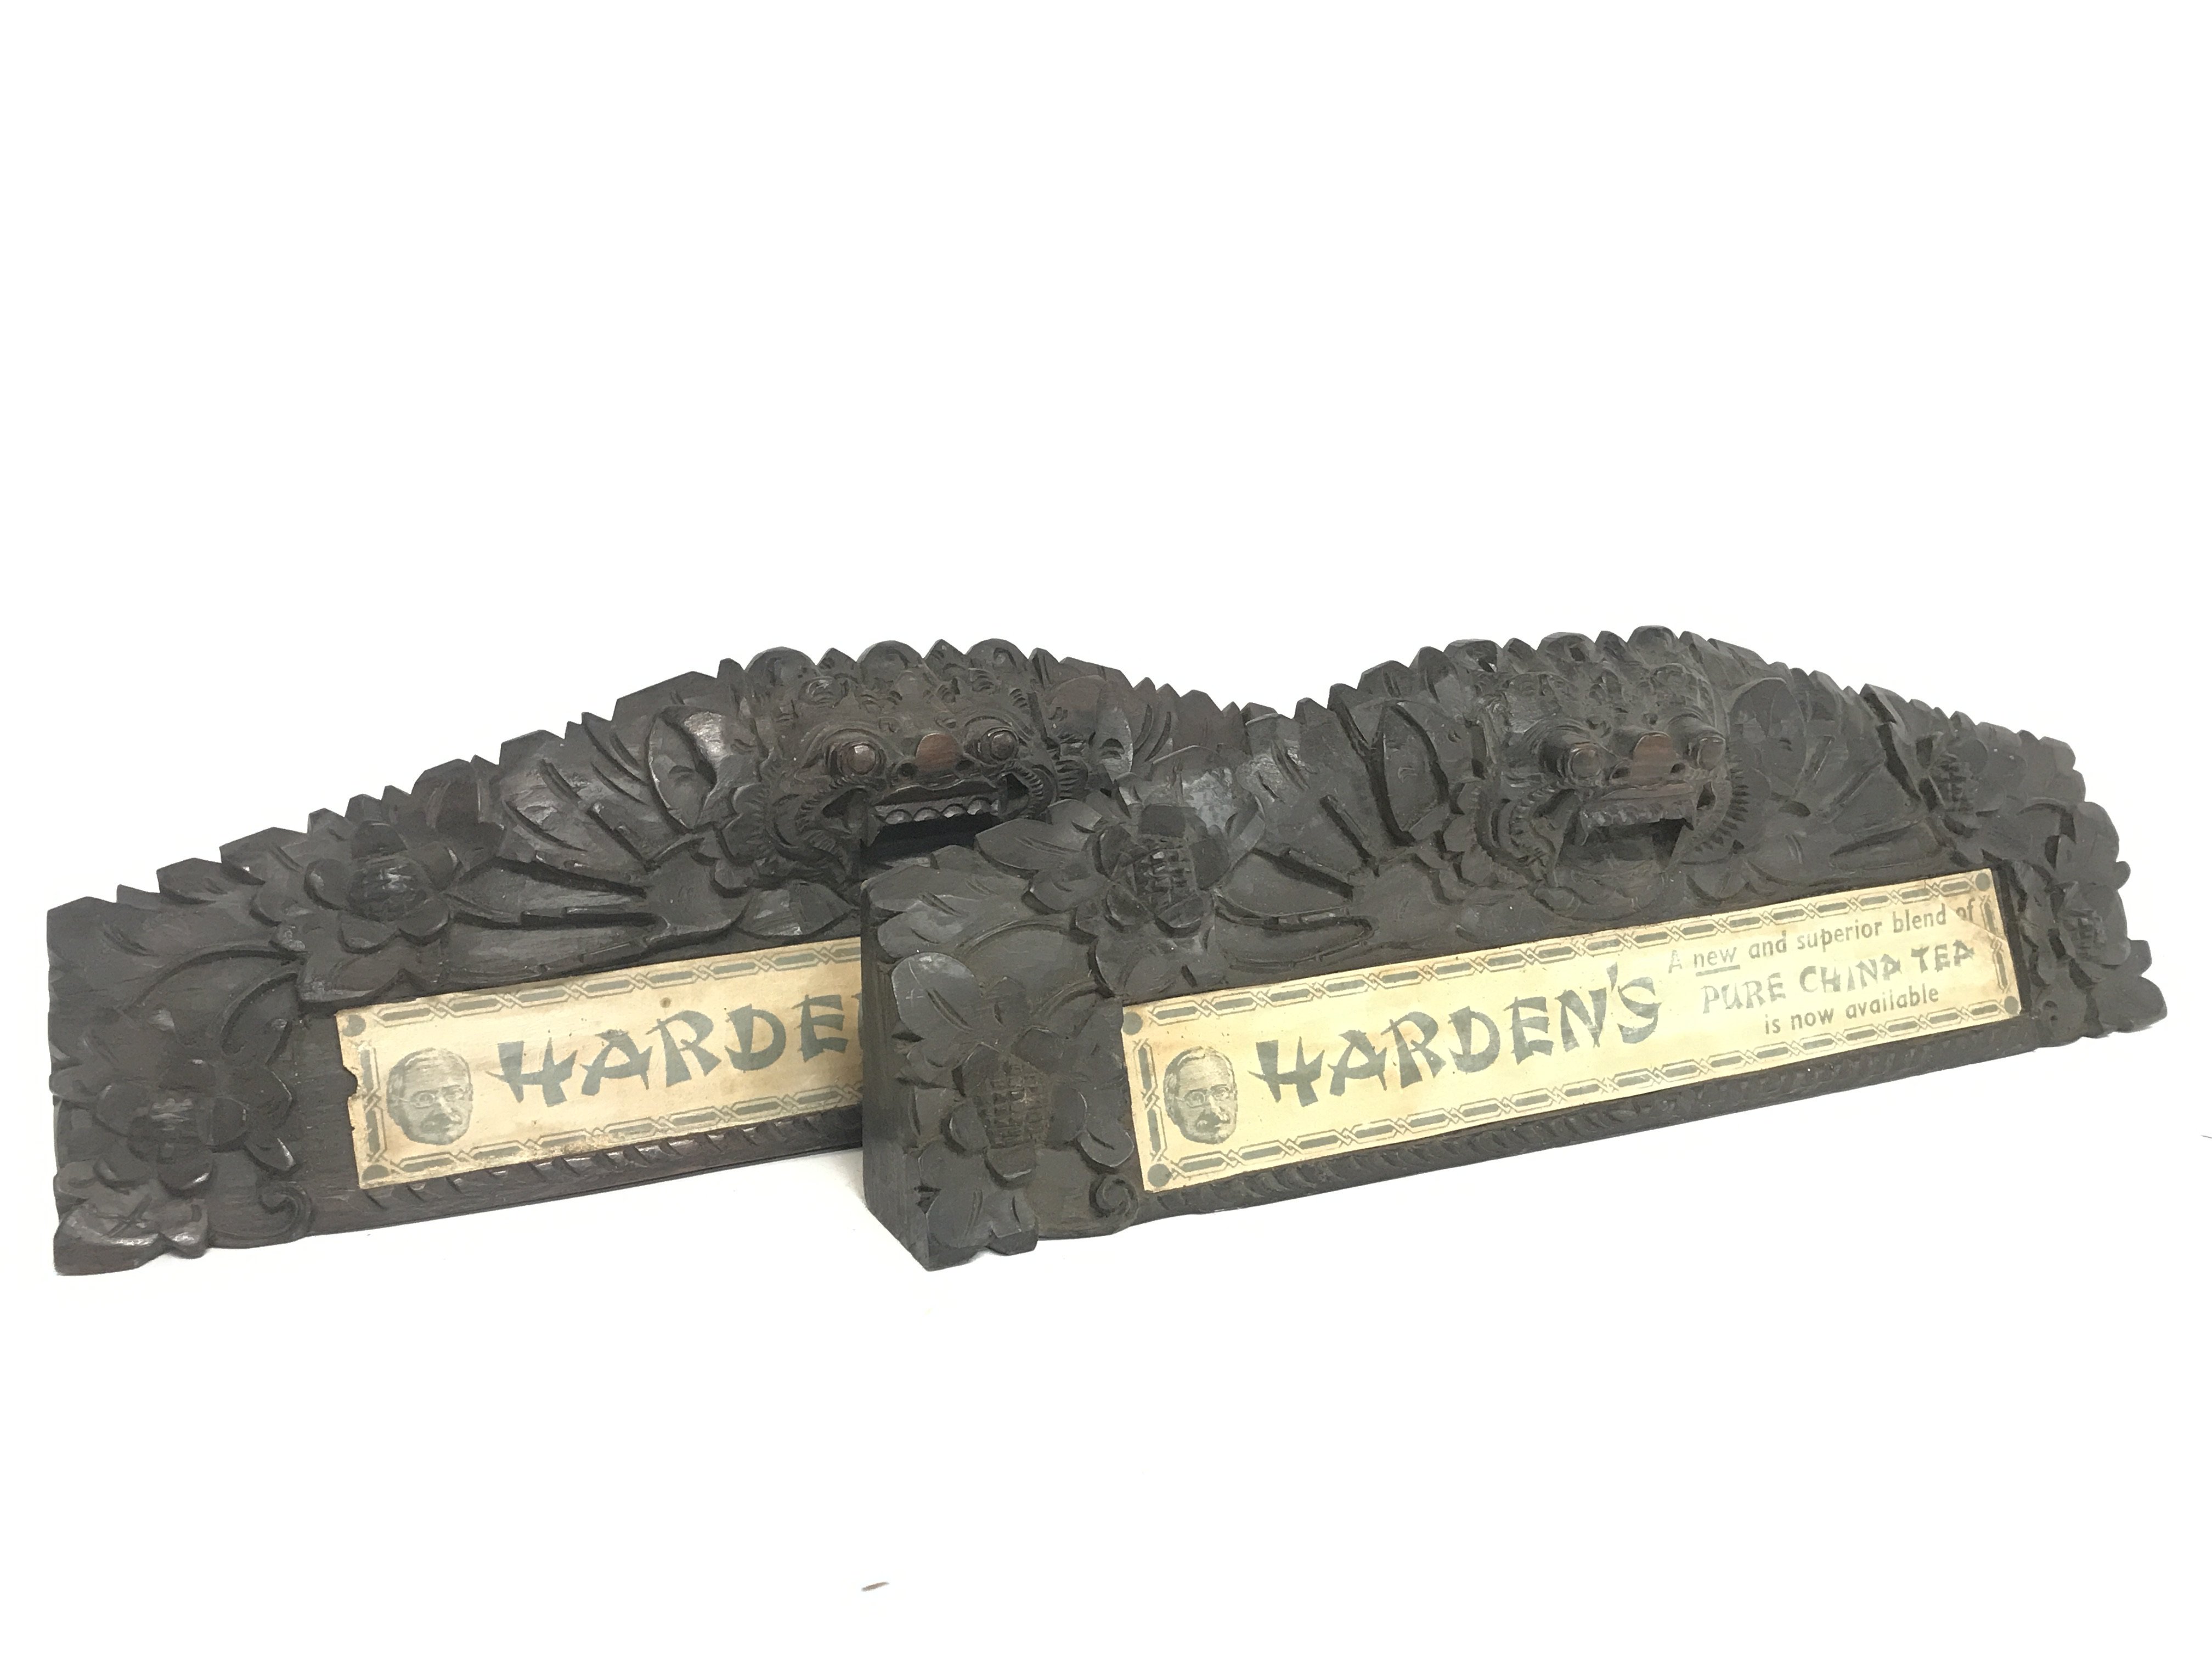 A pair of Hardens pure China tea carved wooden sho